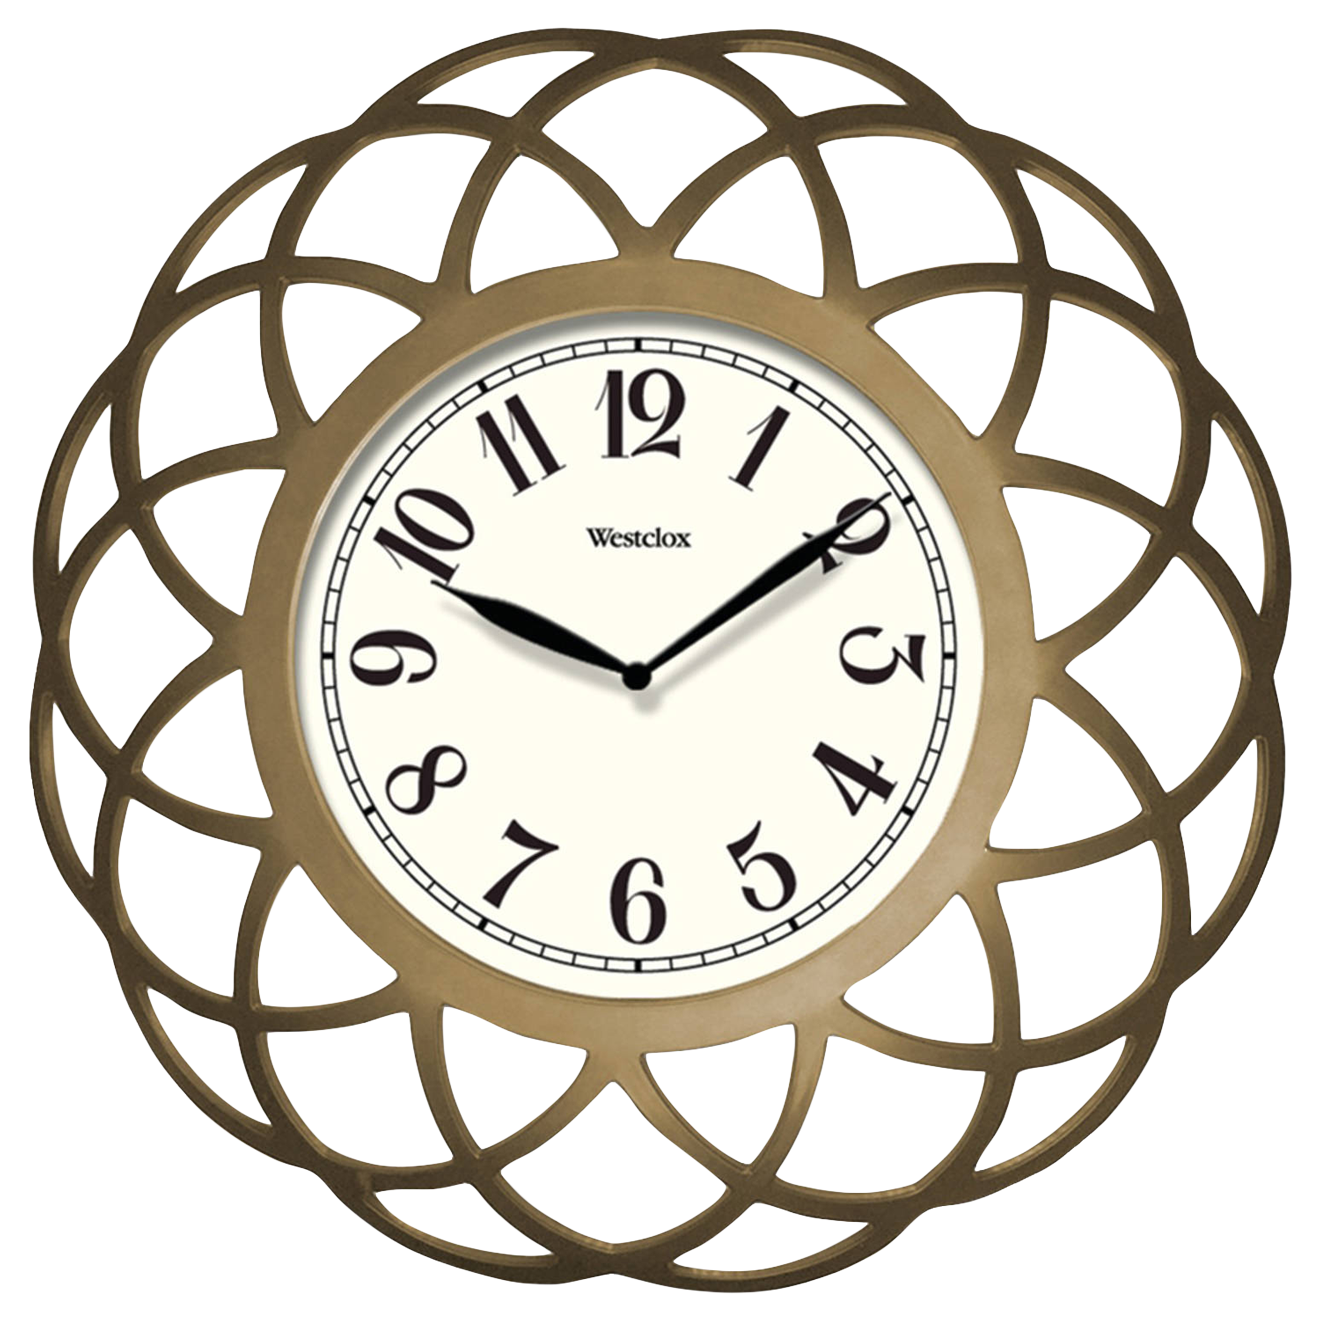 A Clock With A Gold Design